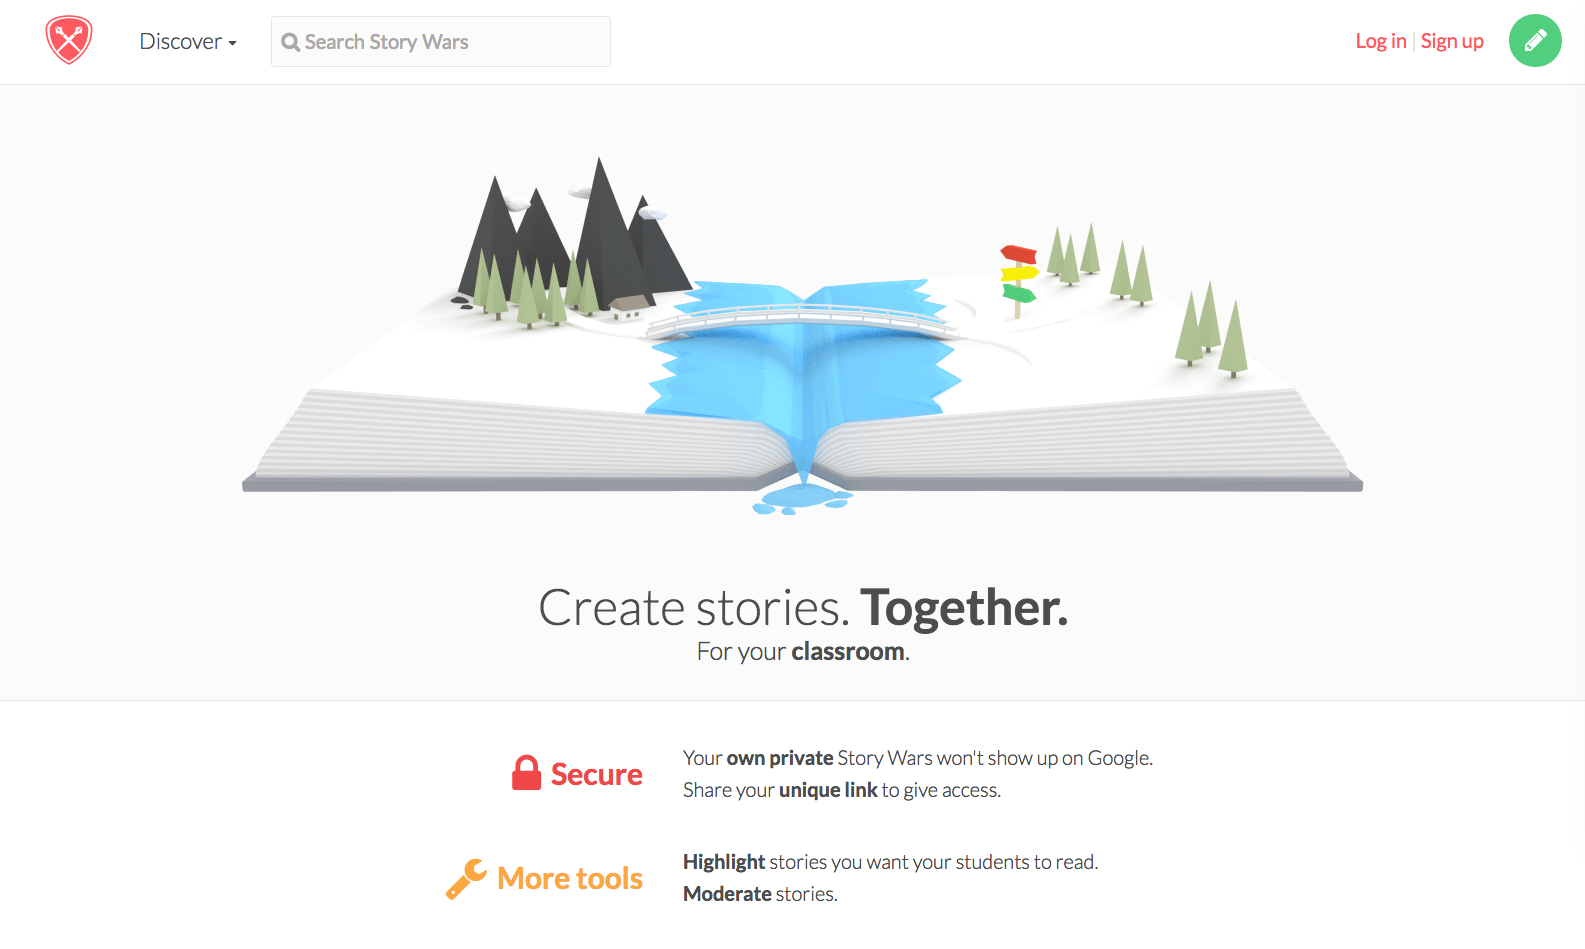 Story Wars is a collaborative website for creating and reading stories